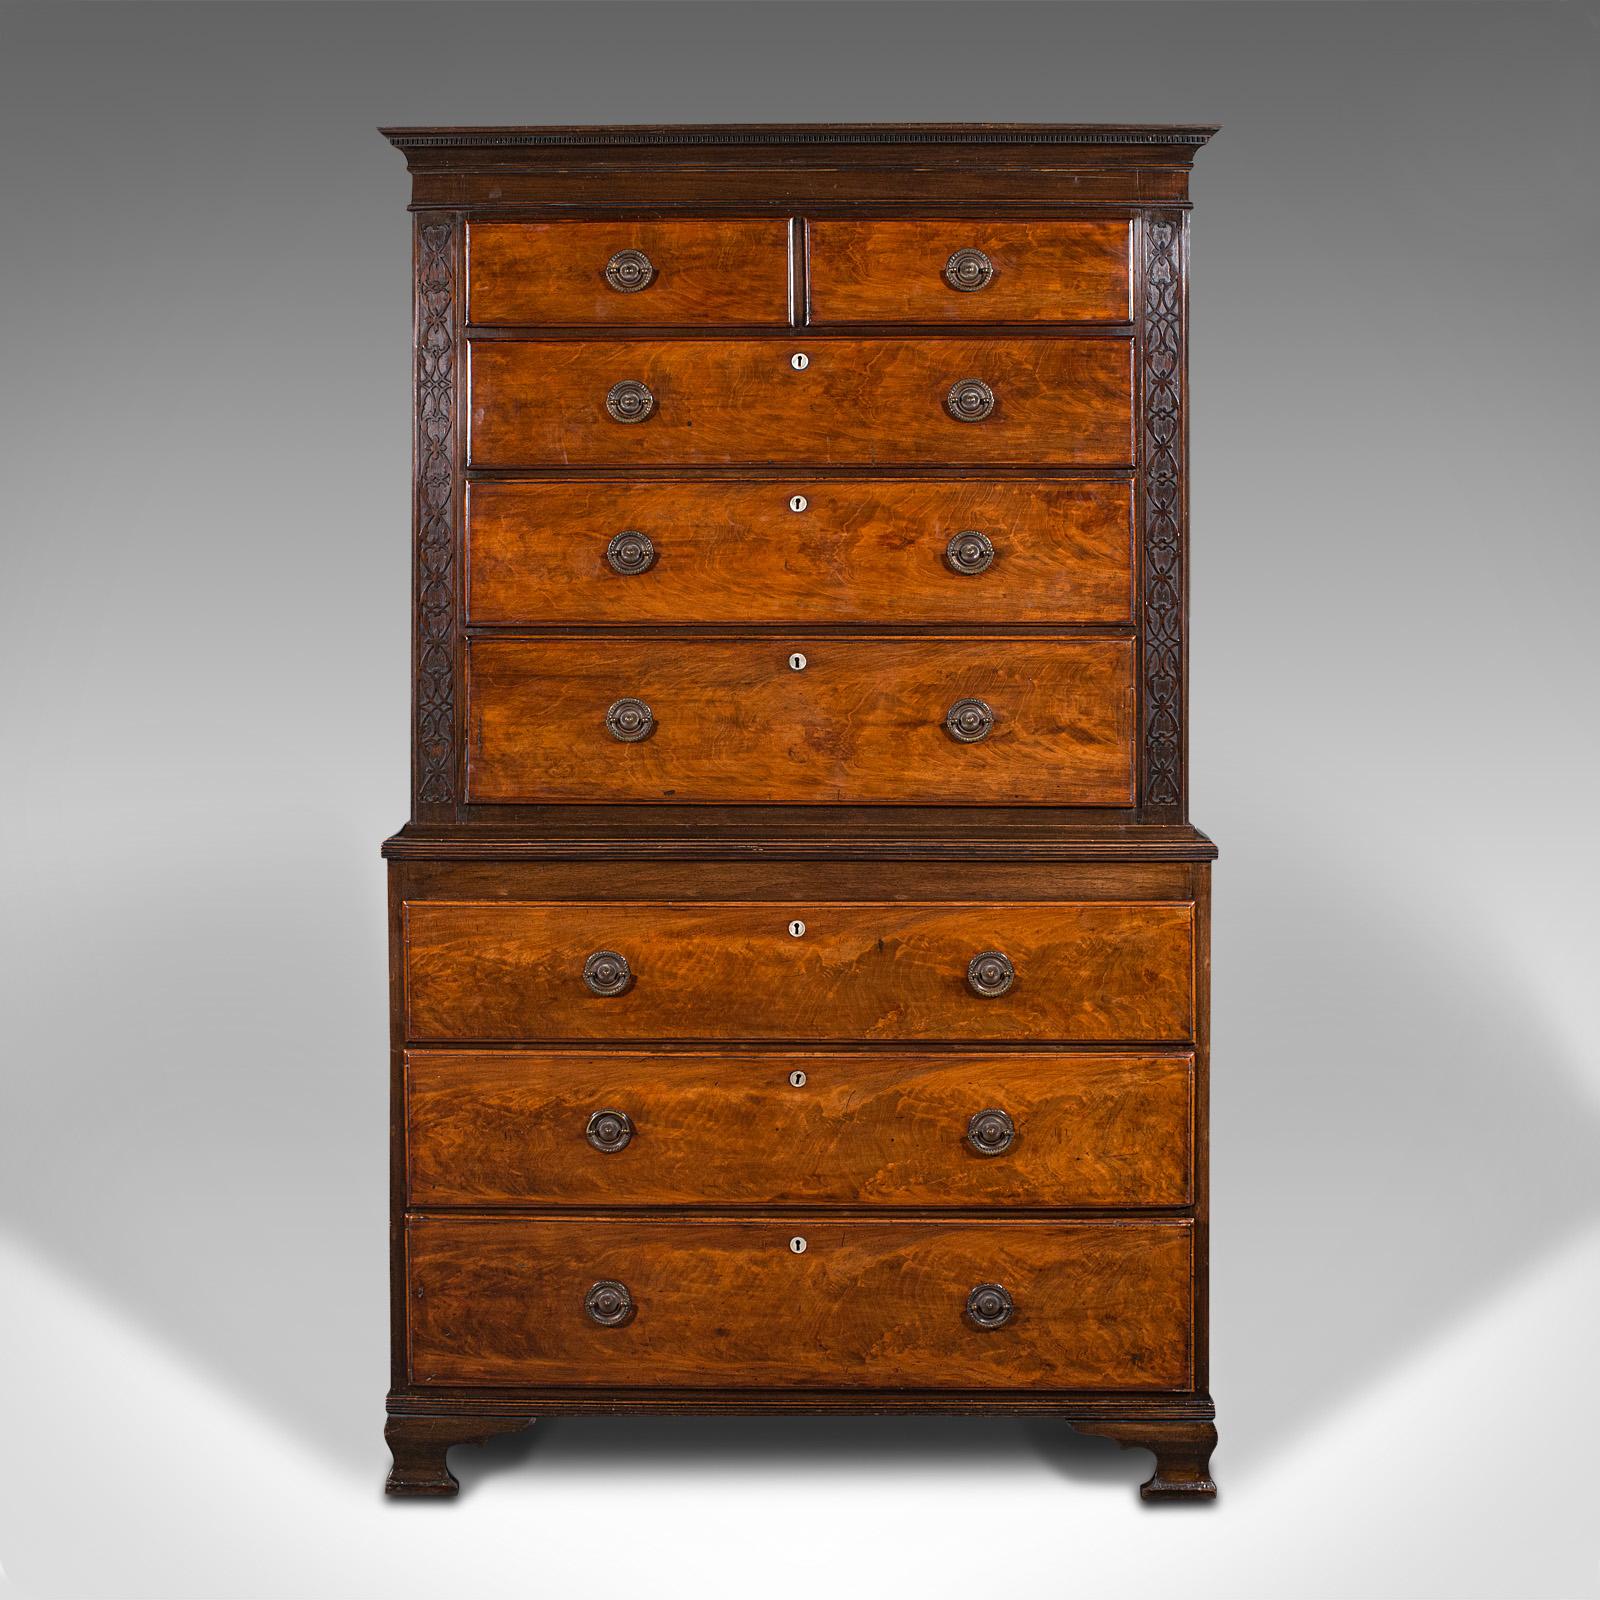 This is an antique grand chest on chest of drawers. An English, walnut and mahogany tallboy, dating to the Georgian period, circa 1800.

Striking appearance and of superior craftsmanship
Displays a desirable aged patina and in good order
Dashing